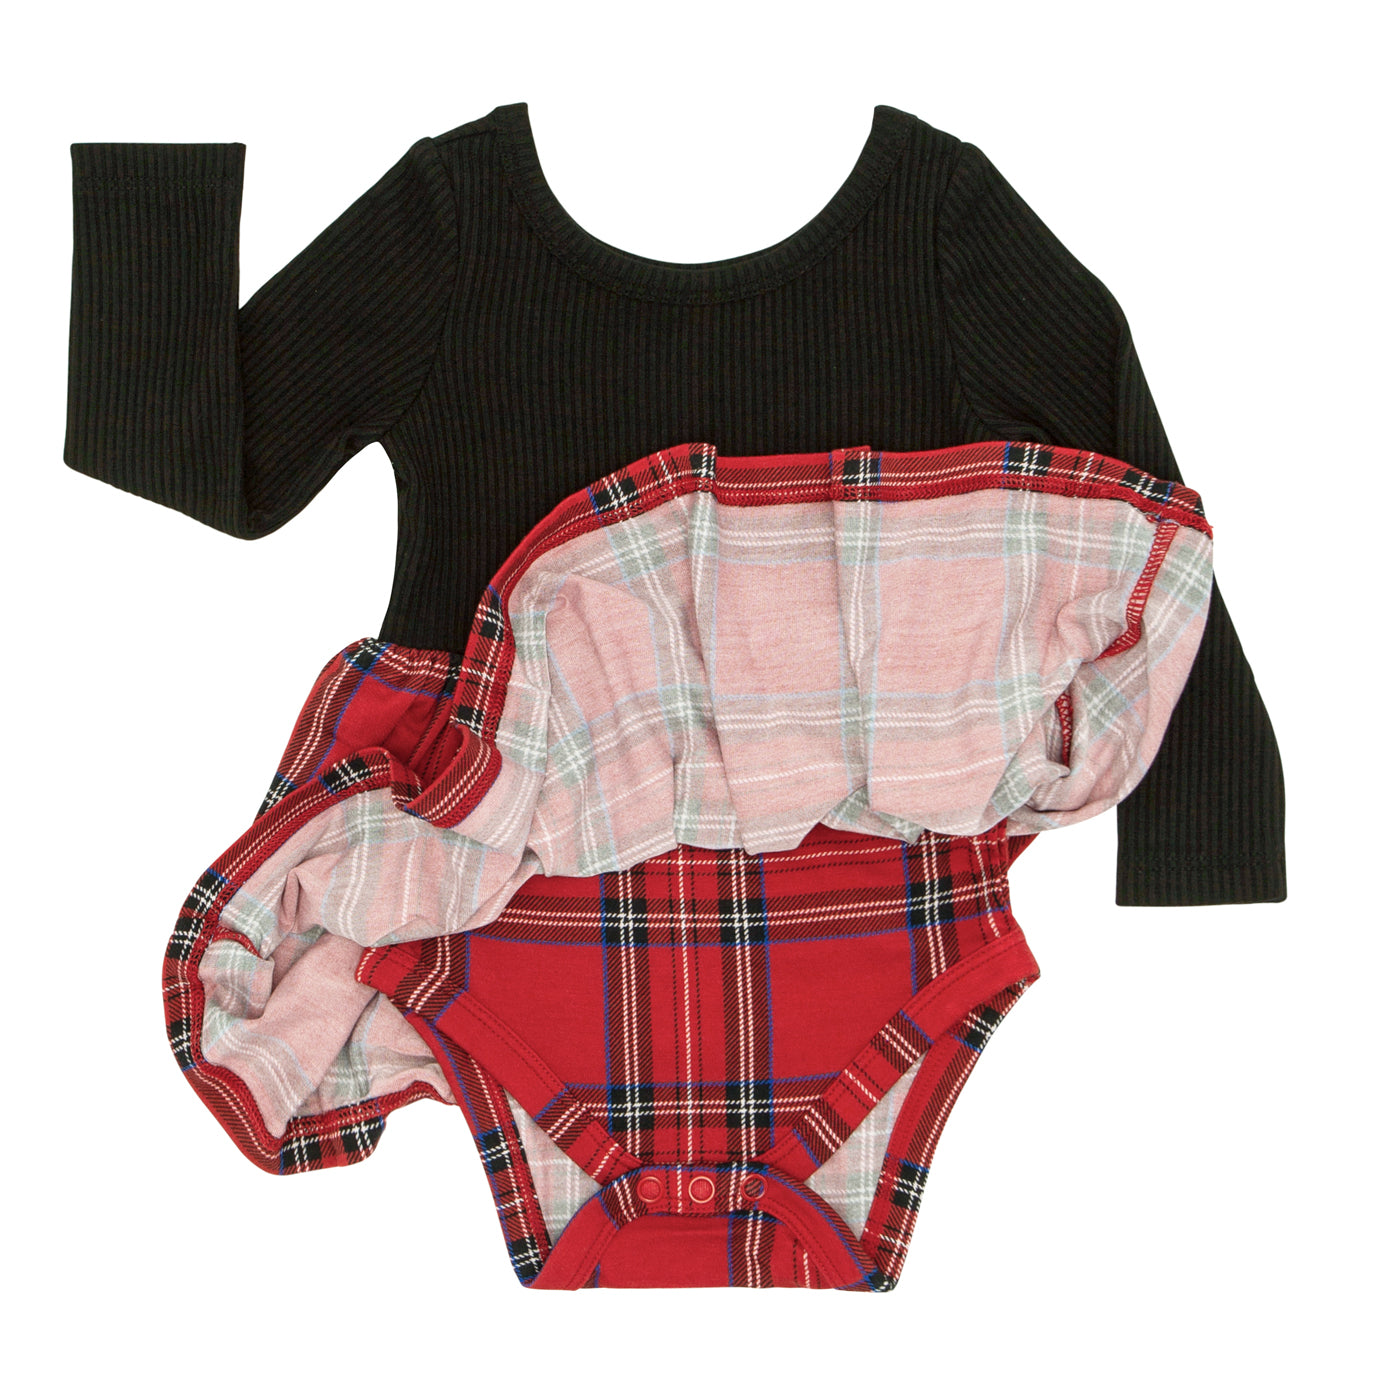 Alternate flat lay image of a Holiday Plaid skater dress with bodysuit